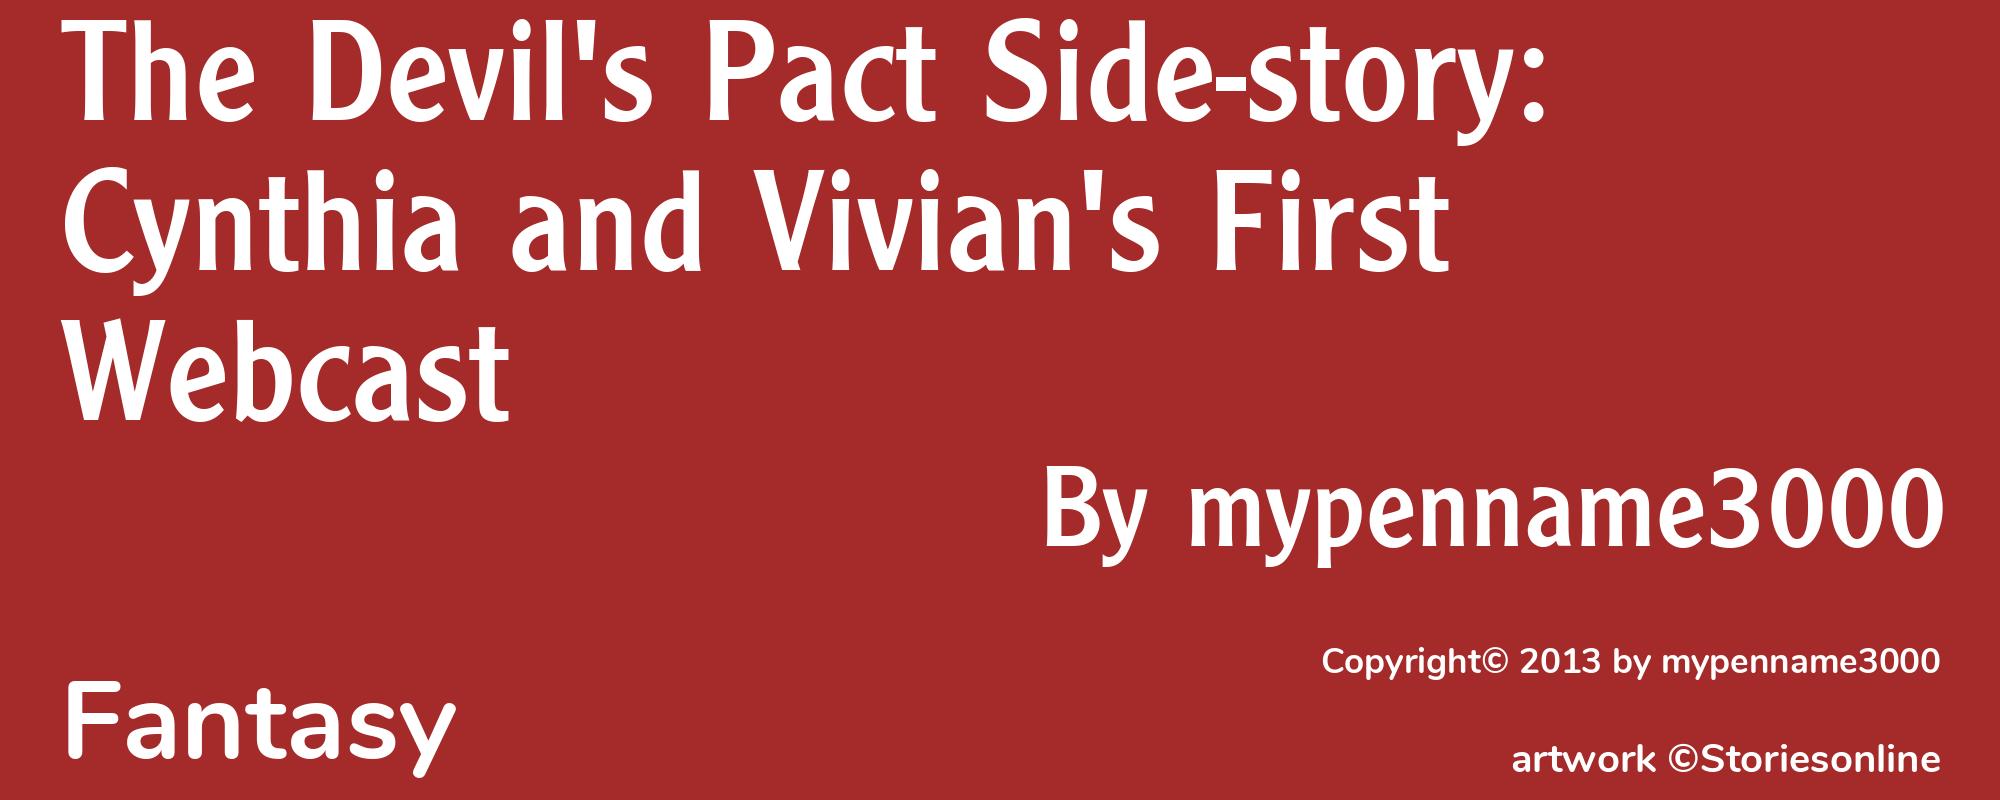 The Devil's Pact Side-story: Cynthia and Vivian's First Webcast - Cover